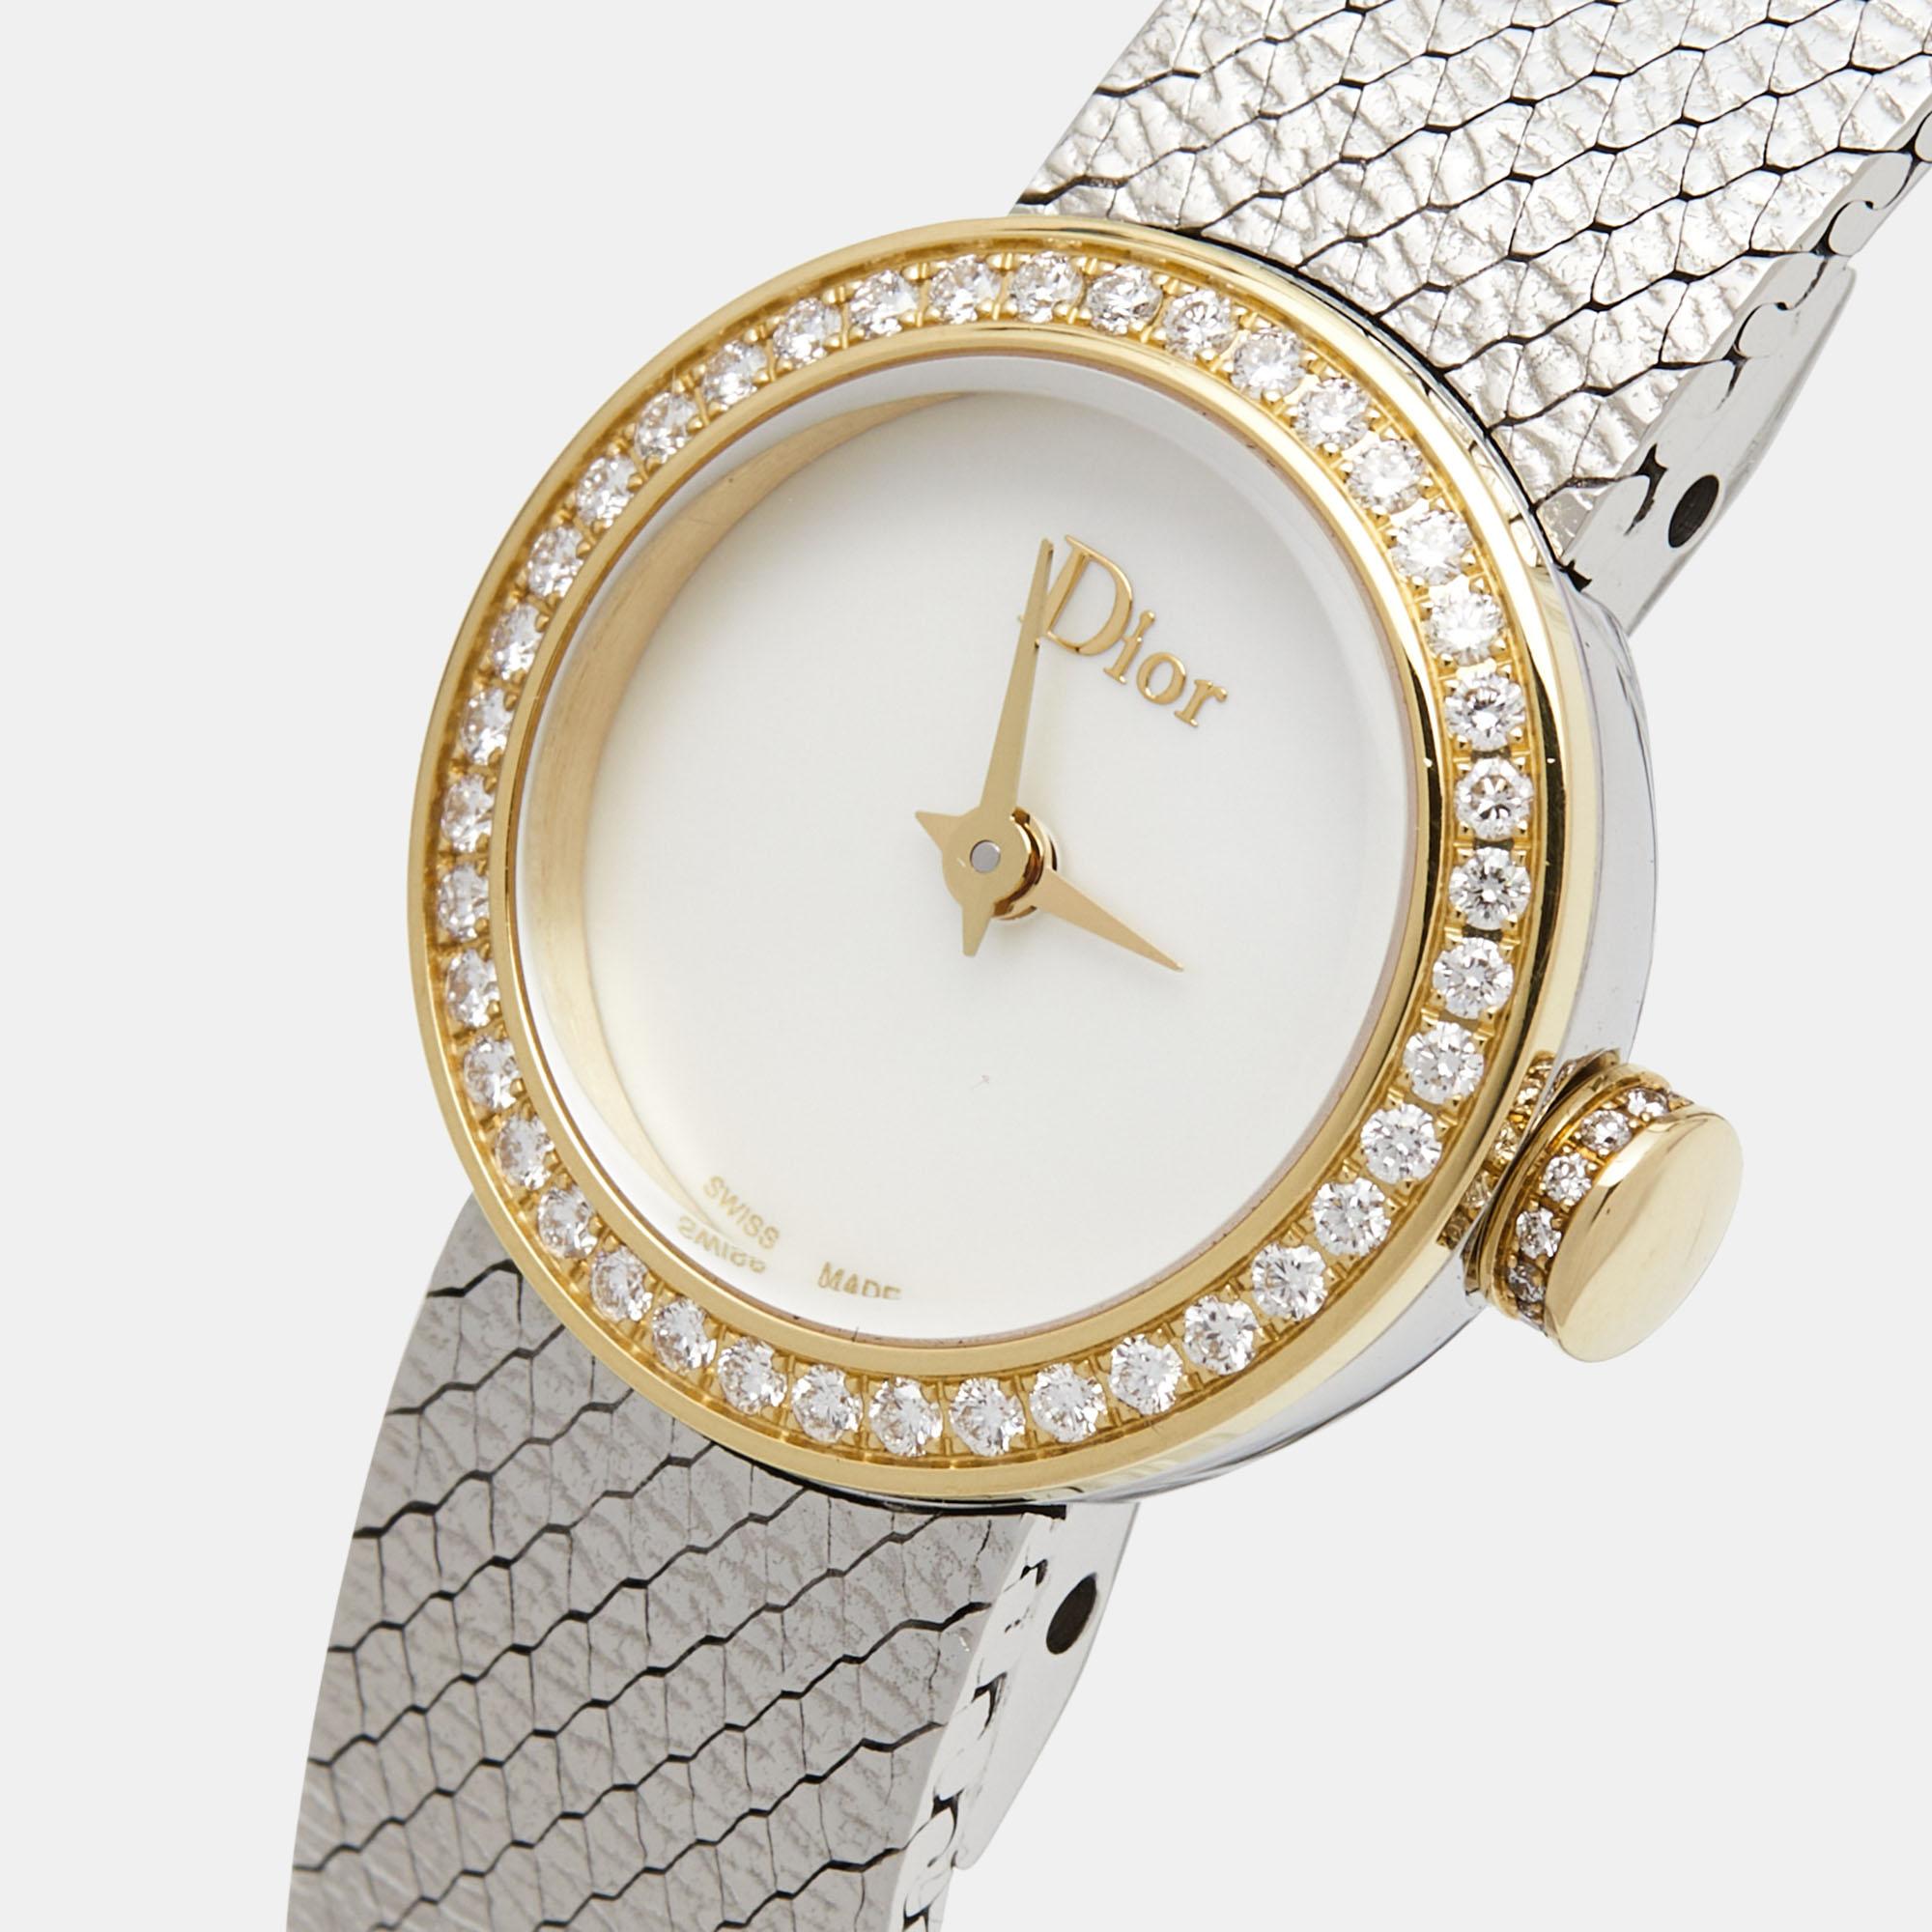 The Dior wristwatch is an exquisite blend of luxury and elegance. Crafted in 18K yellow gold and stainless steel, it features a radiant mother-of-pearl dial, adorned with diamonds, and showcases the iconic La Mini D Dior Satine design, epitomizing